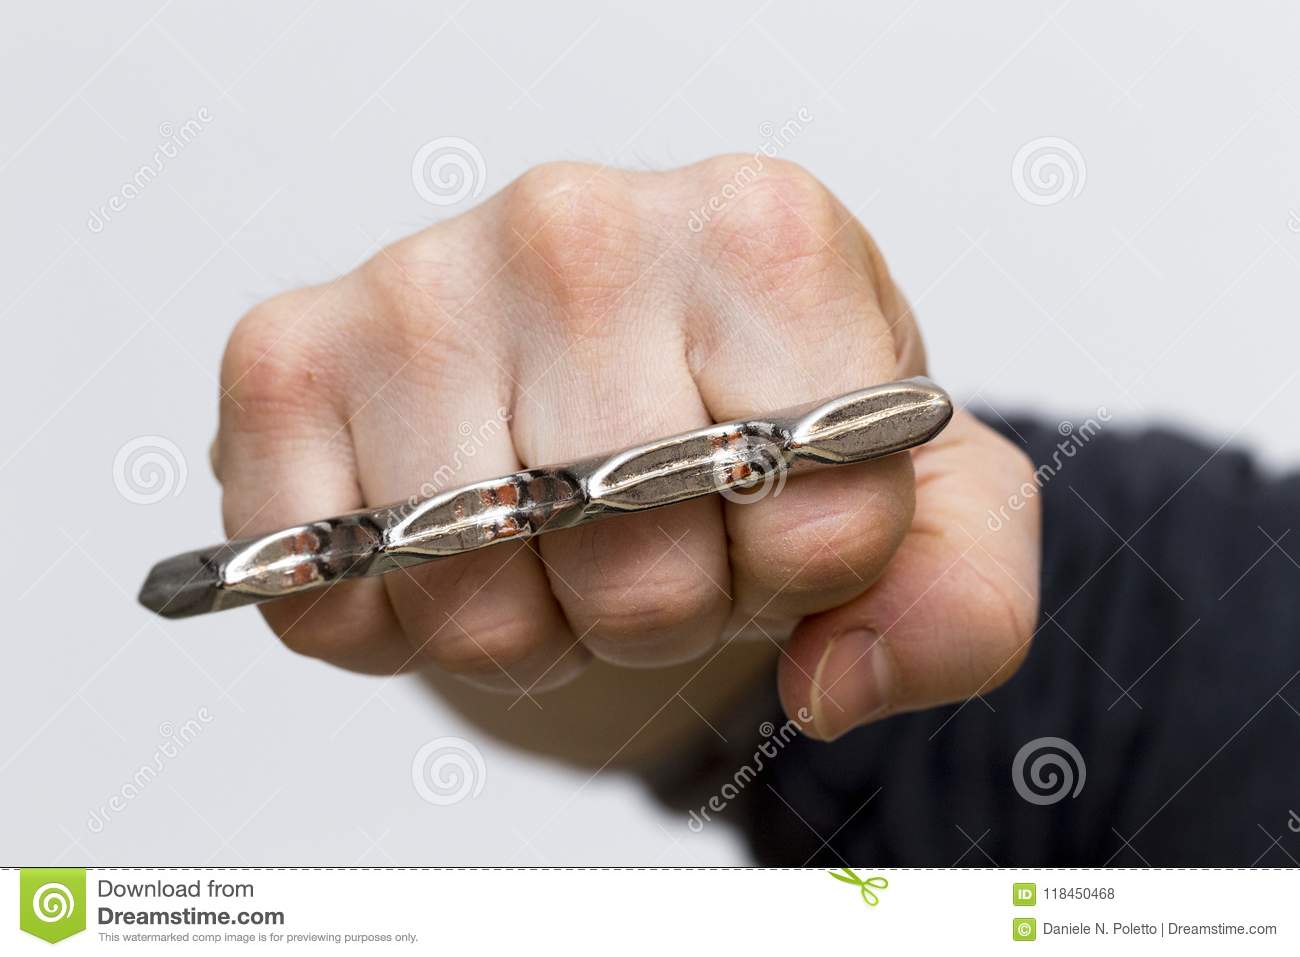 Are Brass Knuckles Legal in Illinois? — Chicago Criminal Lawyer